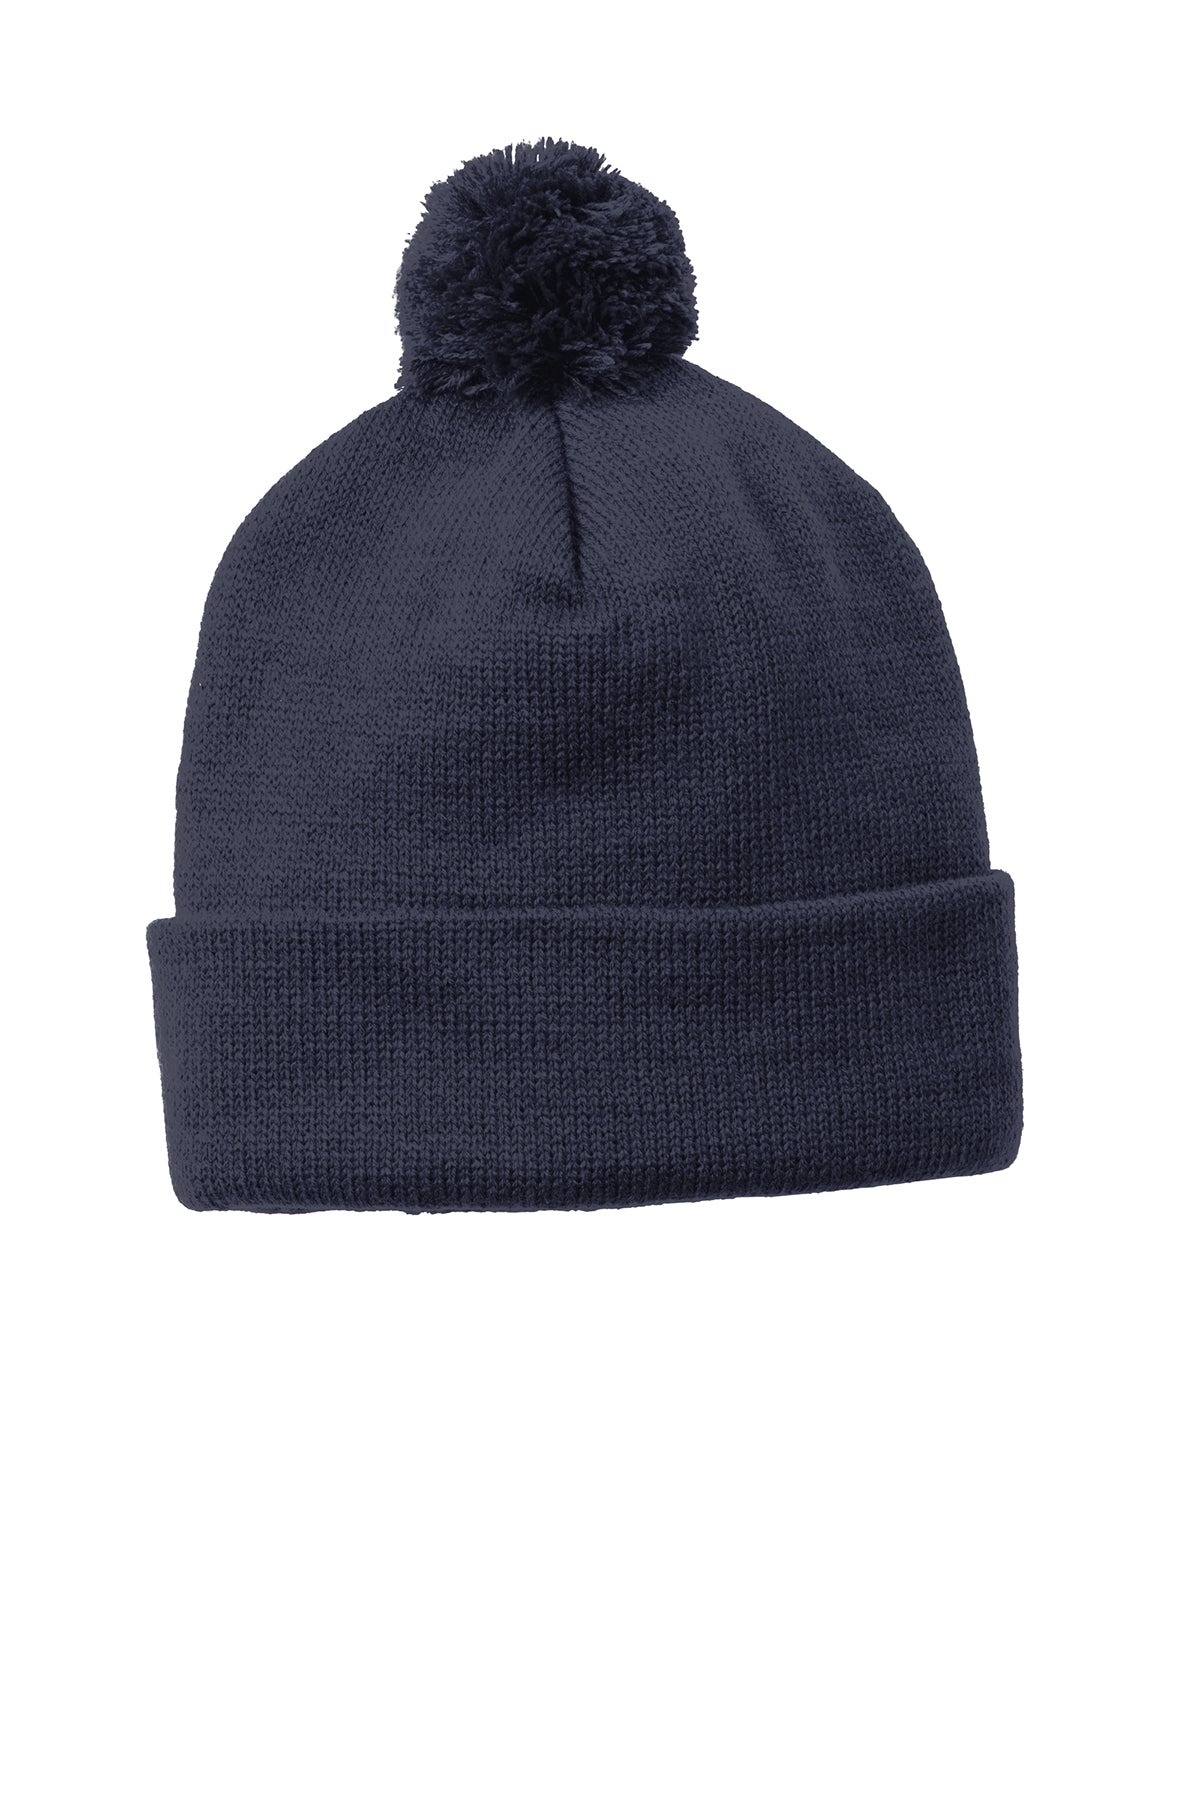 Knit Cap Beanie with Solid Pom Pom - Add Your Full Color Vinyl Logo At No Additional Cost